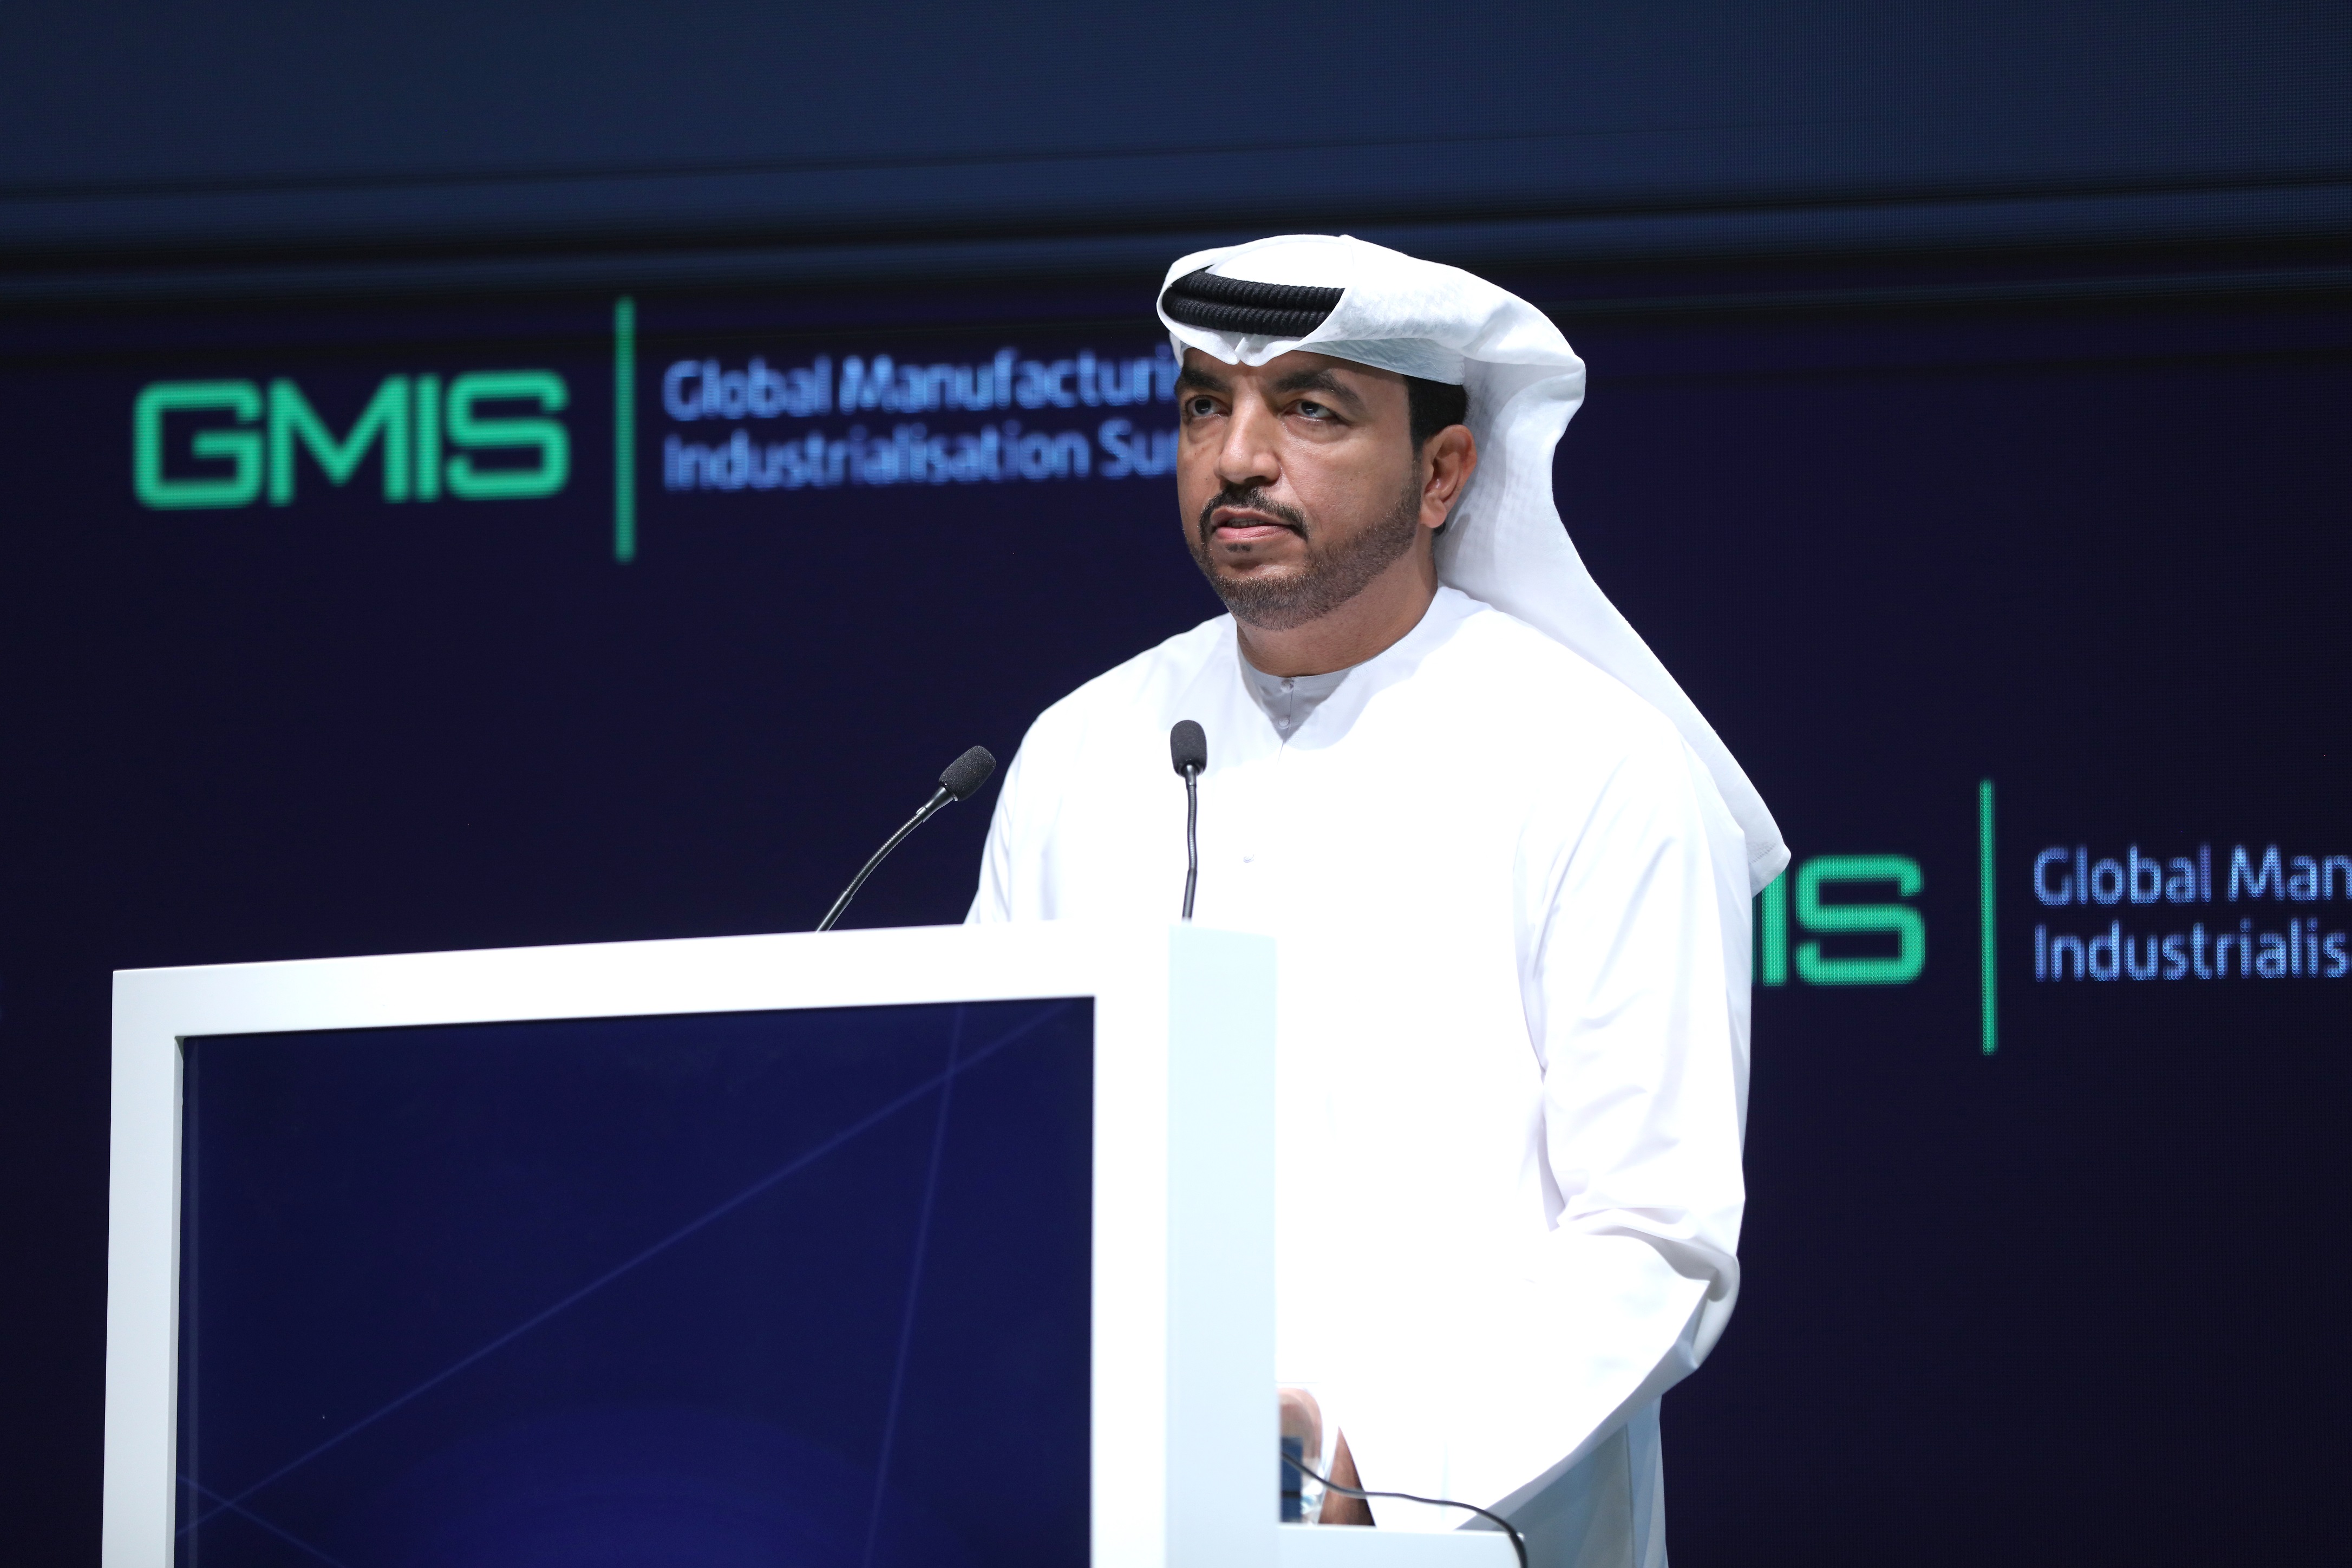 Ministry of Industry and Advanced Technology Adopts Smart Industry Readiness Index, Completes Digital Maturity Assessment for 70 Industrial Companies in UAE